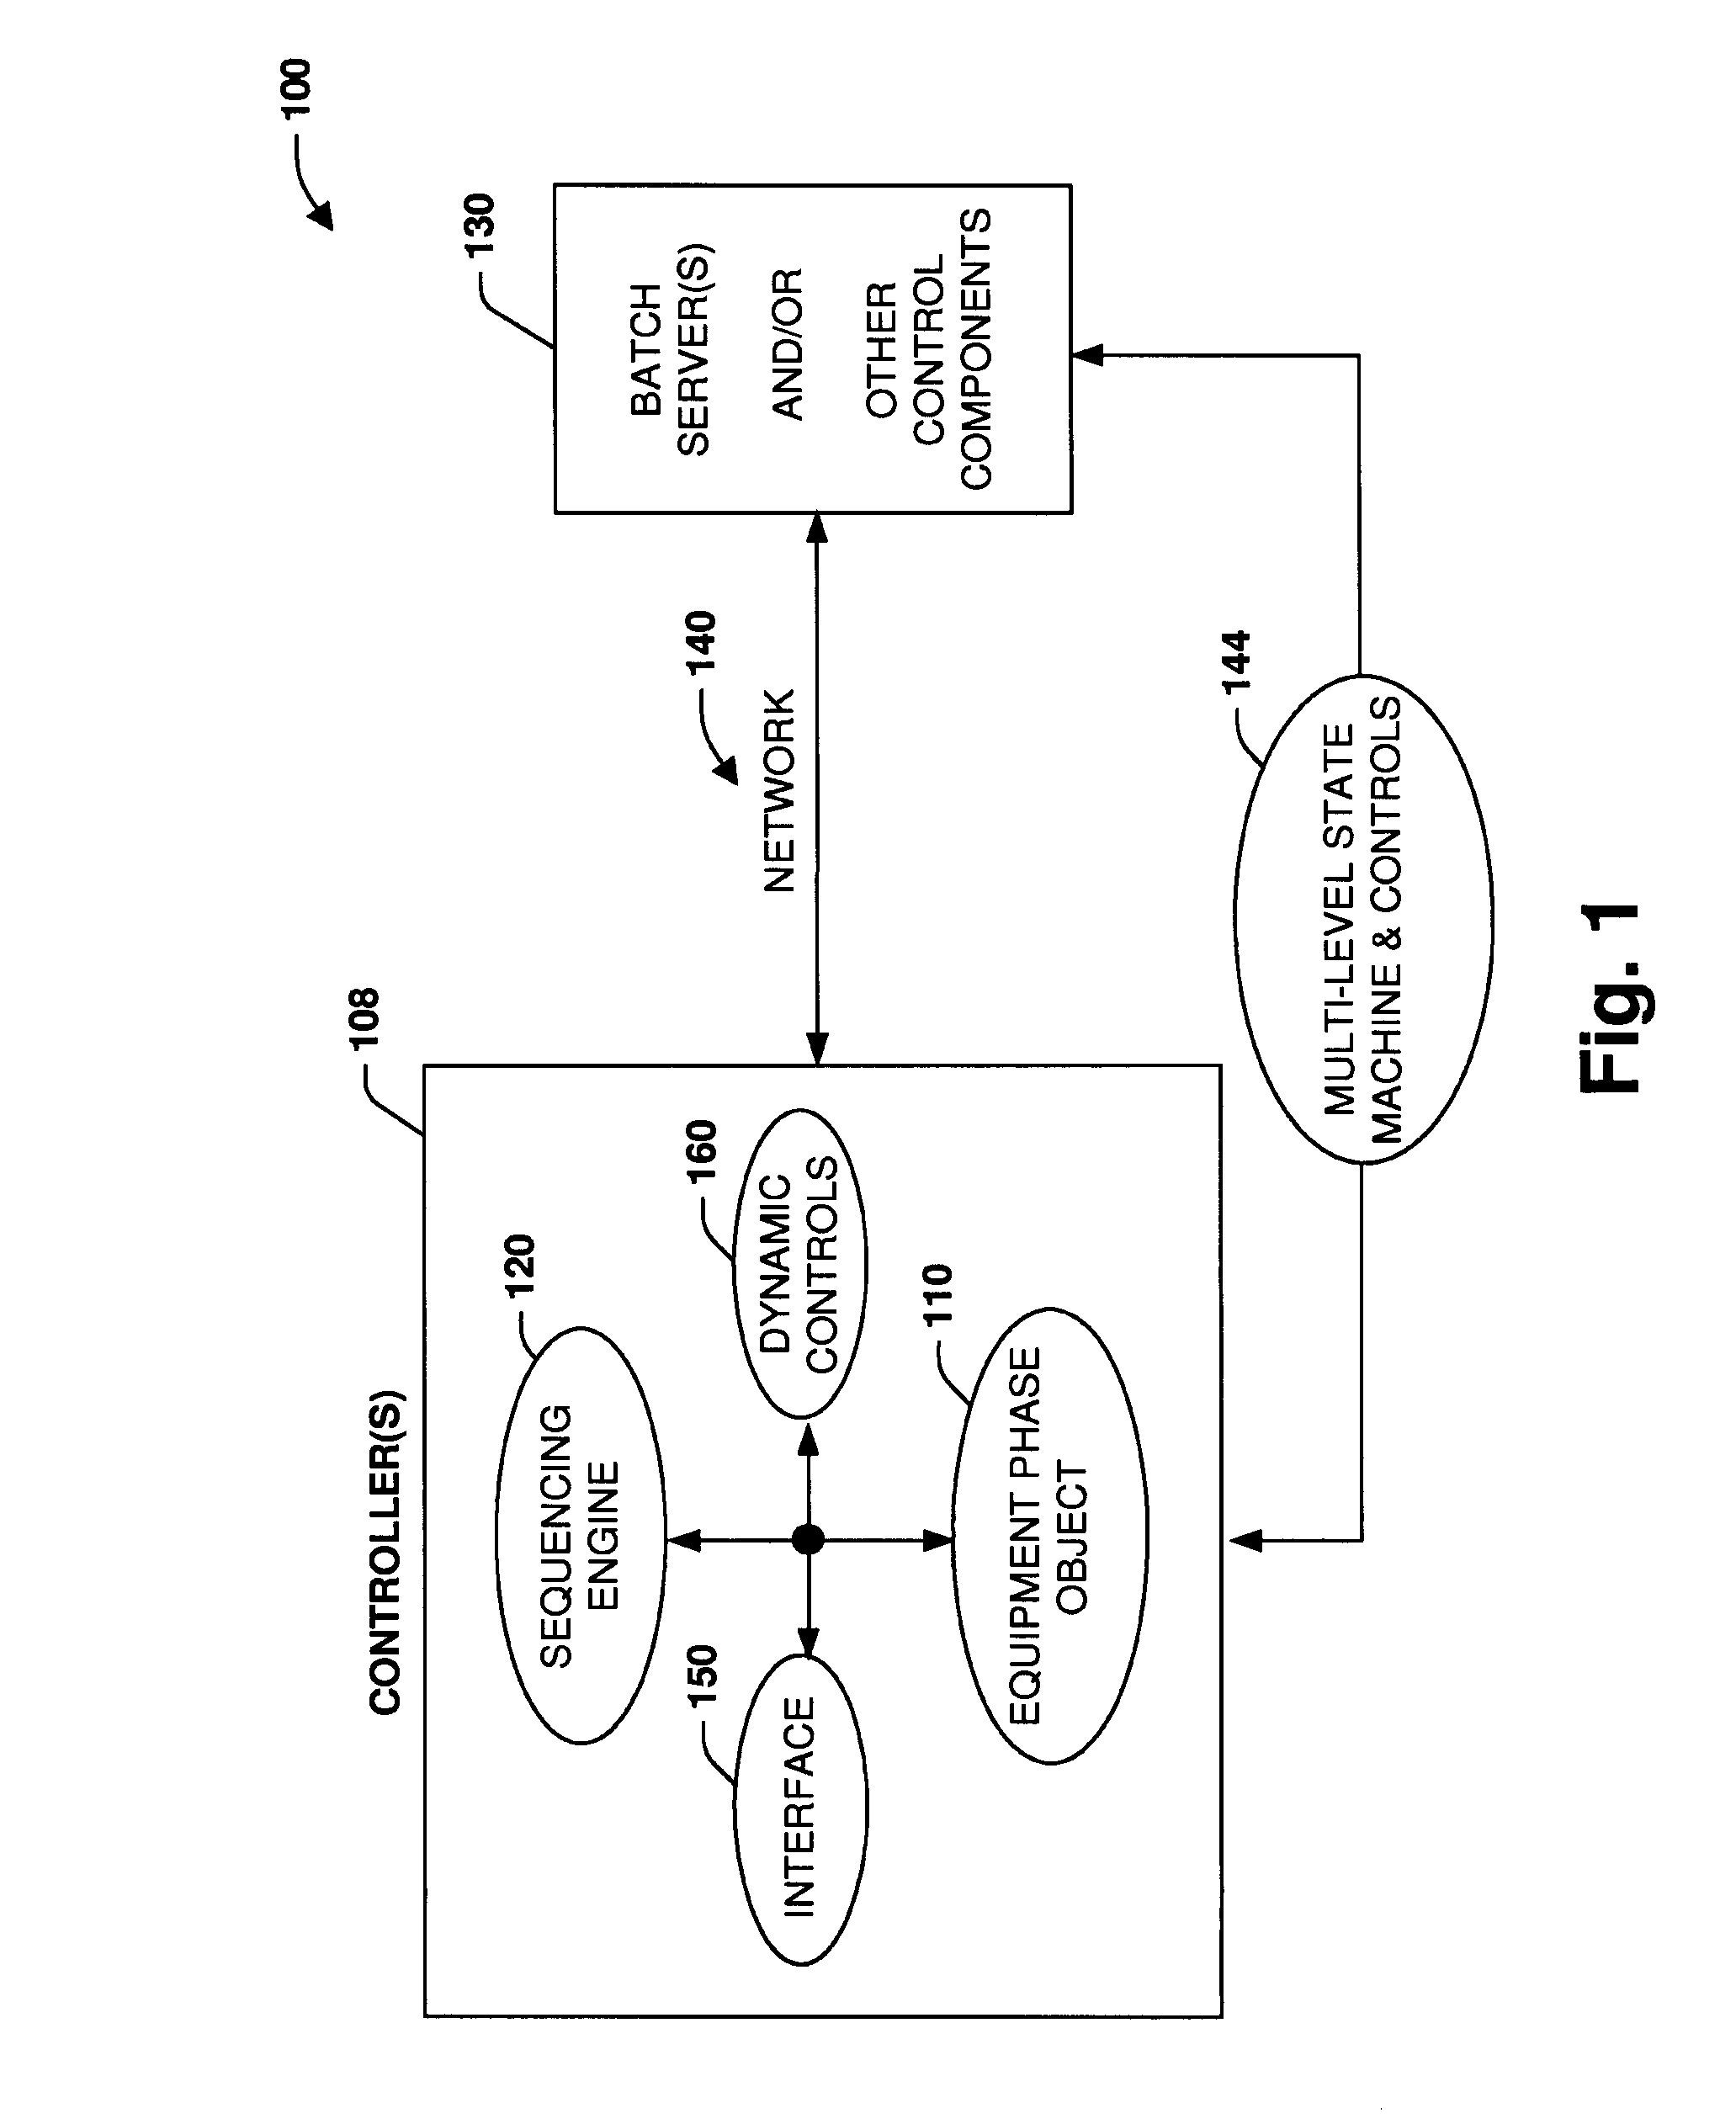 Controller equipment model systems and methods